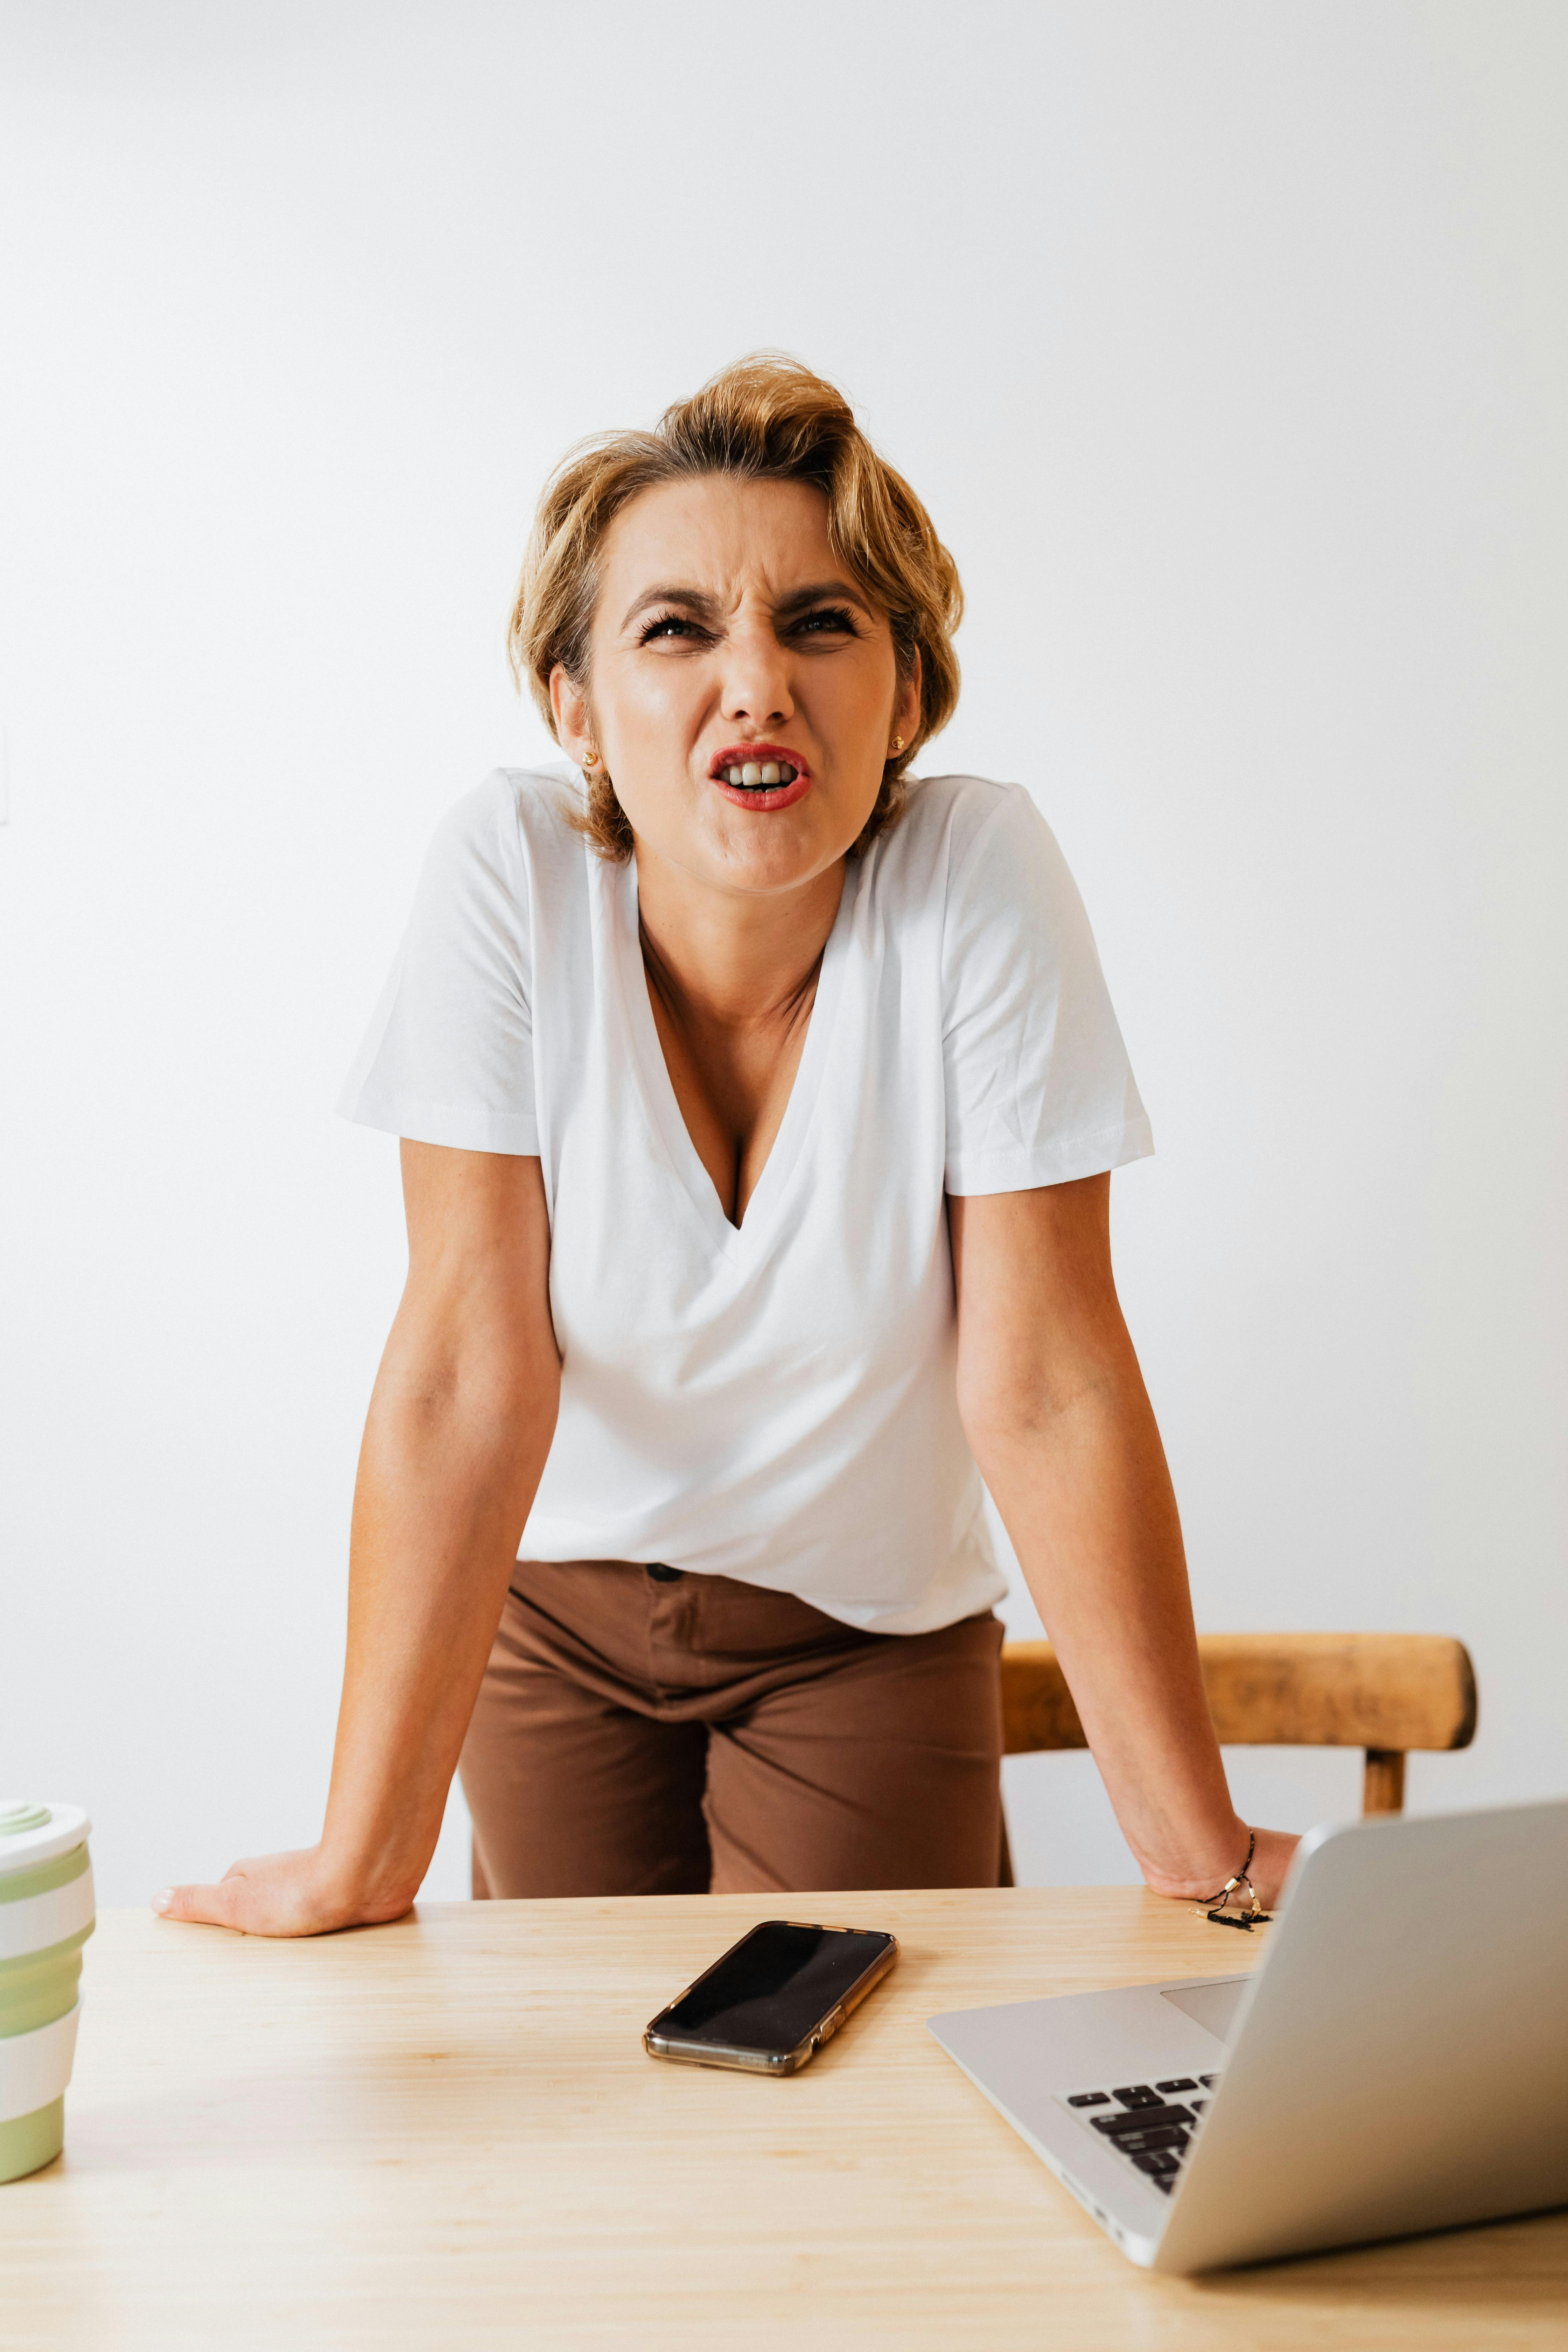 A woman reacting angrily while balancing her hands on a table | Source: Pexels